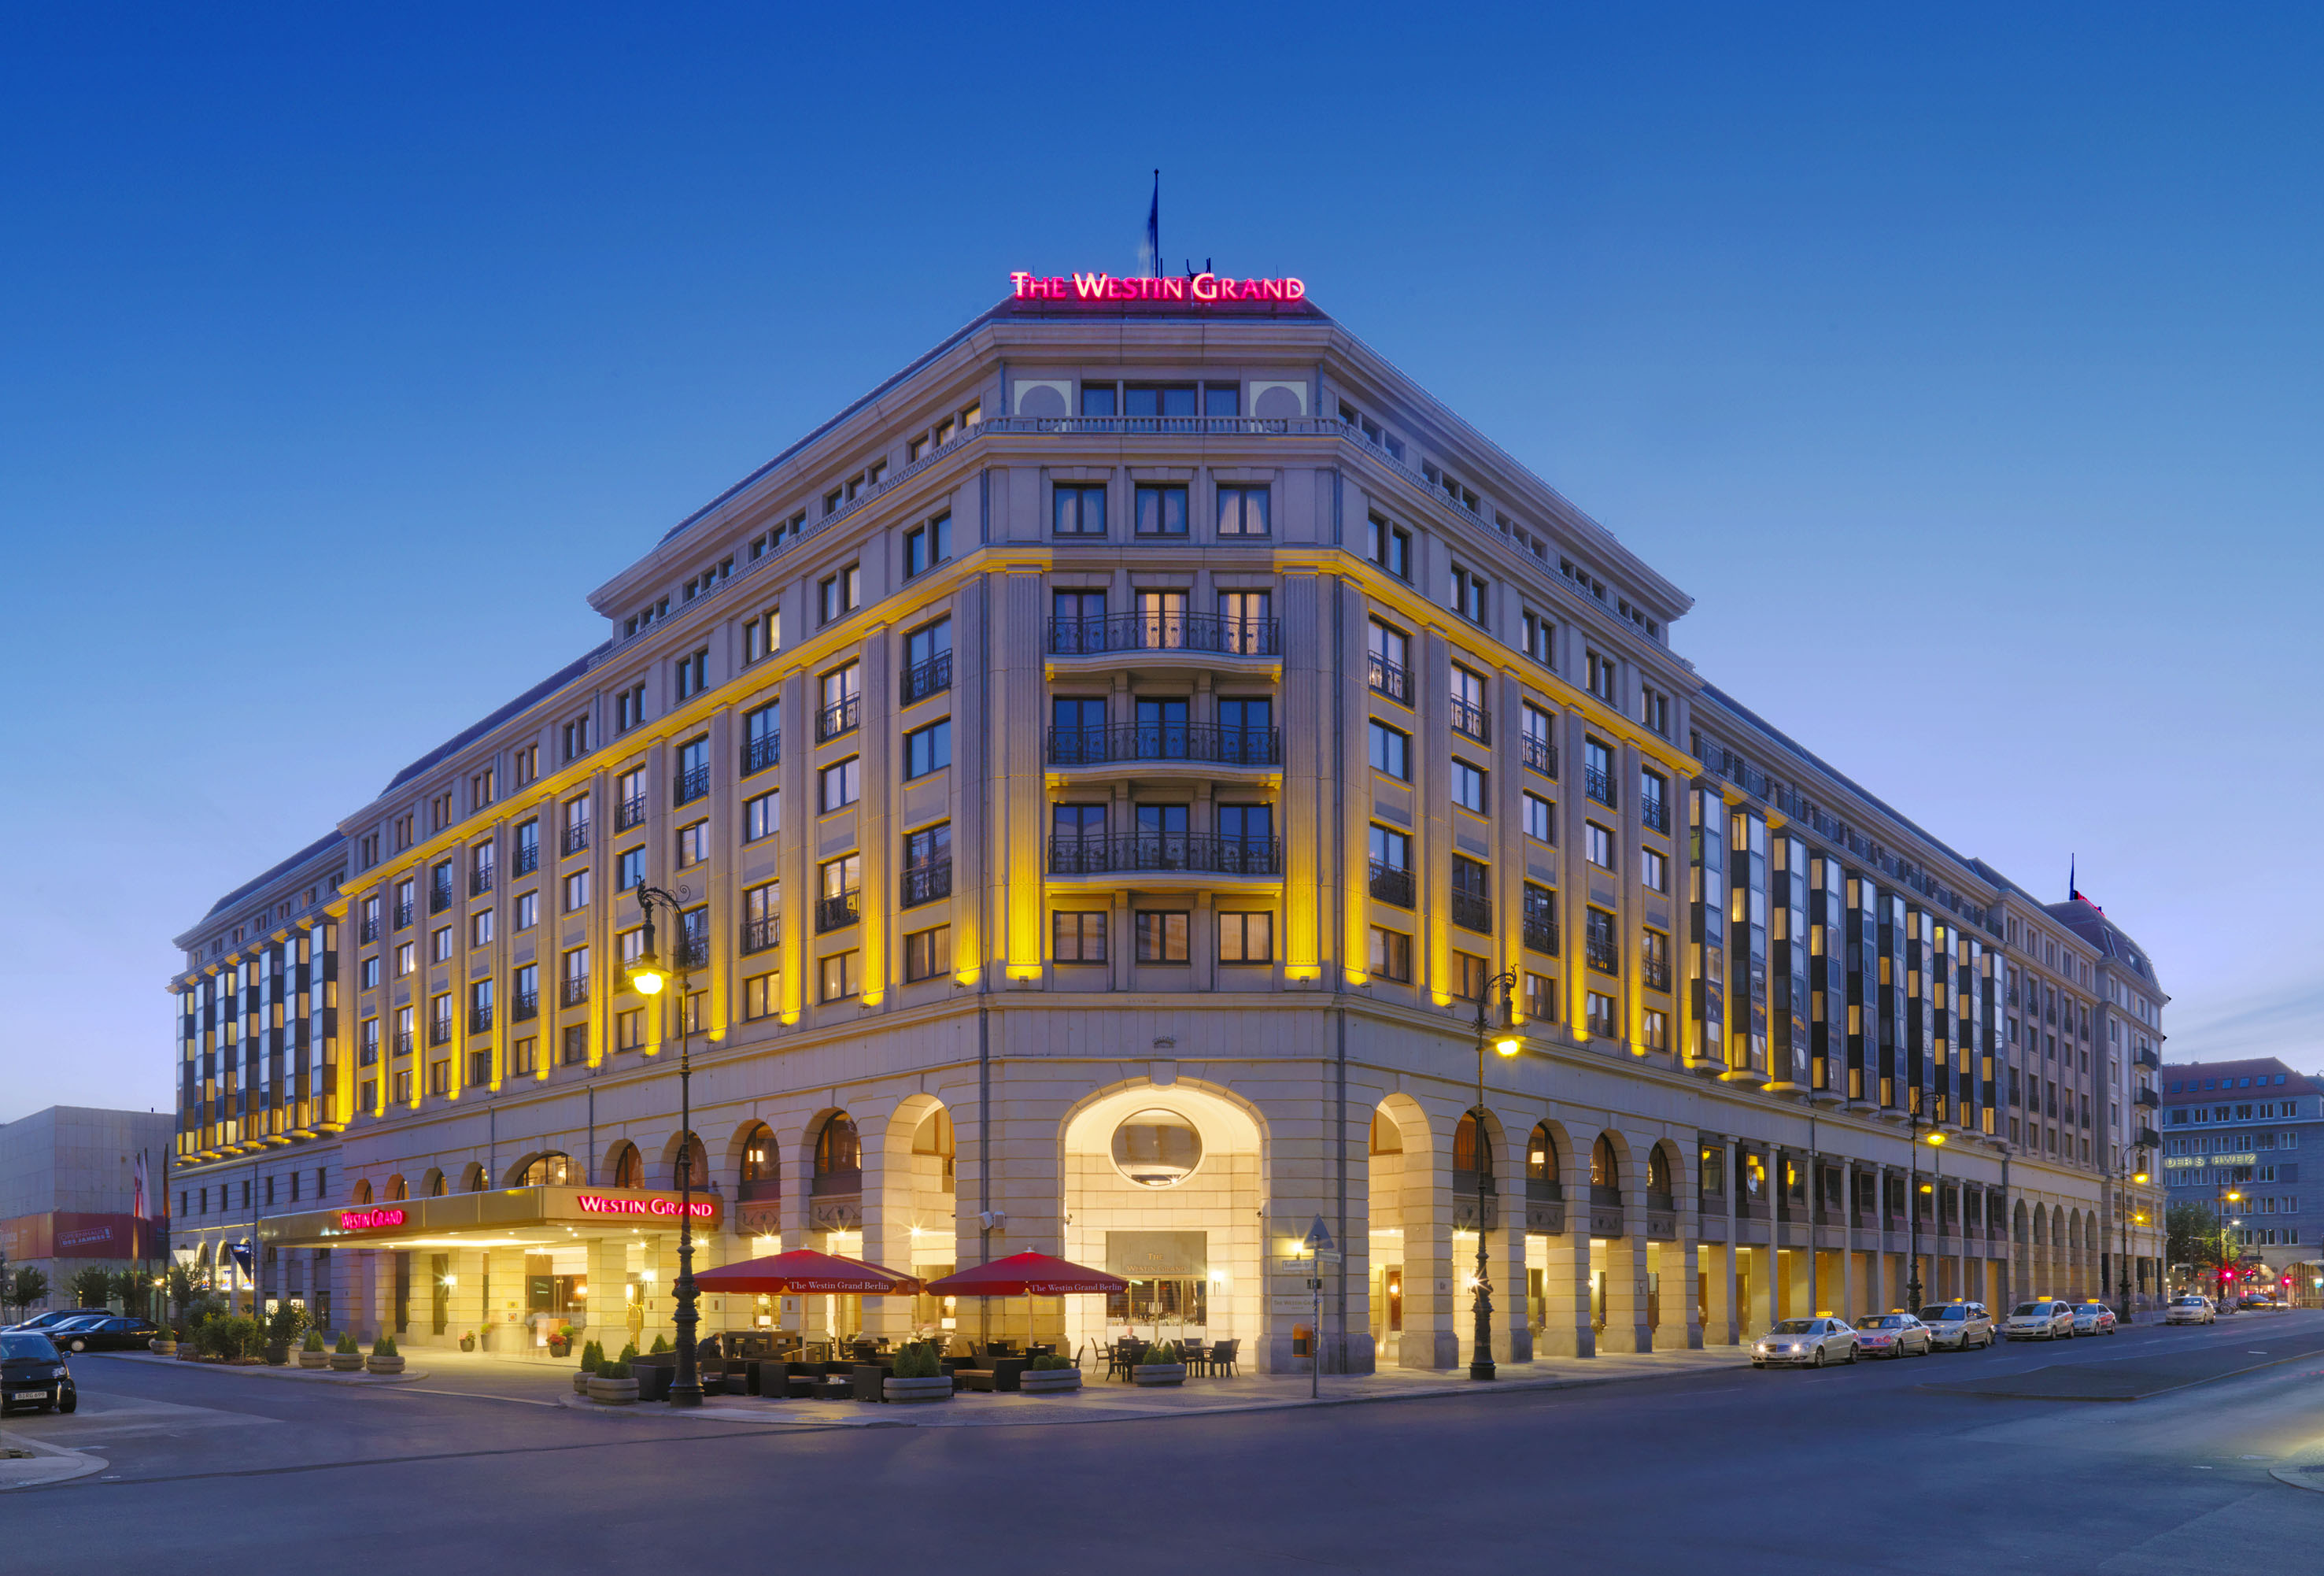 The Westin Grand hotel exterior in Berlin, Germany.